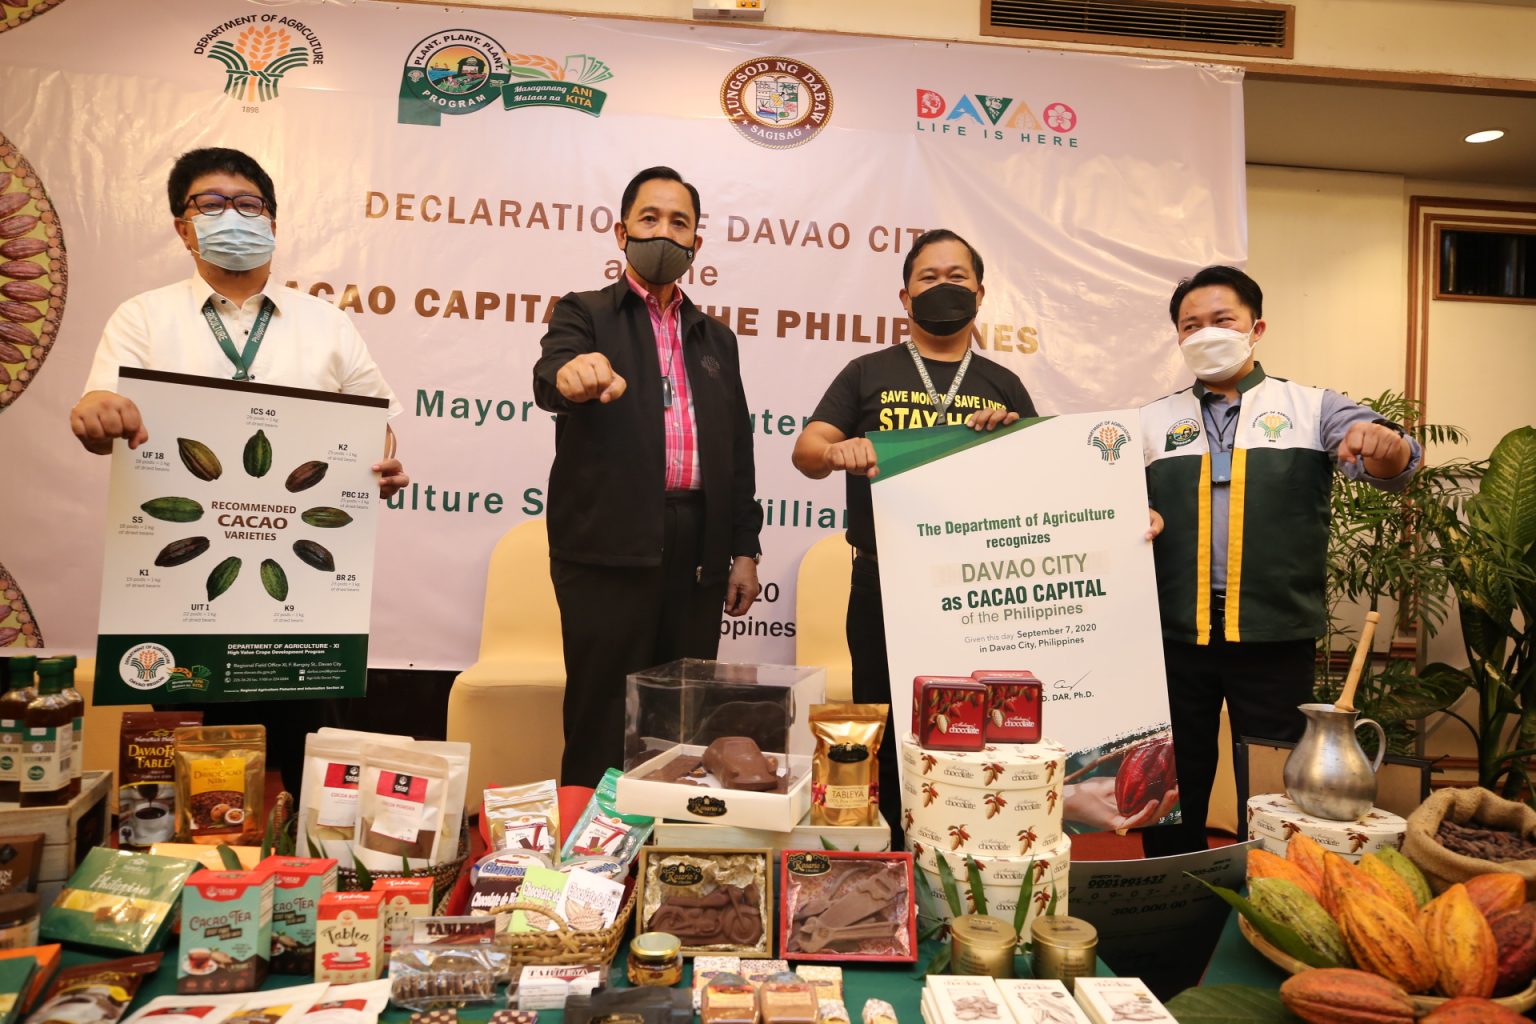 Davao is Cacao Capital of the Philippines